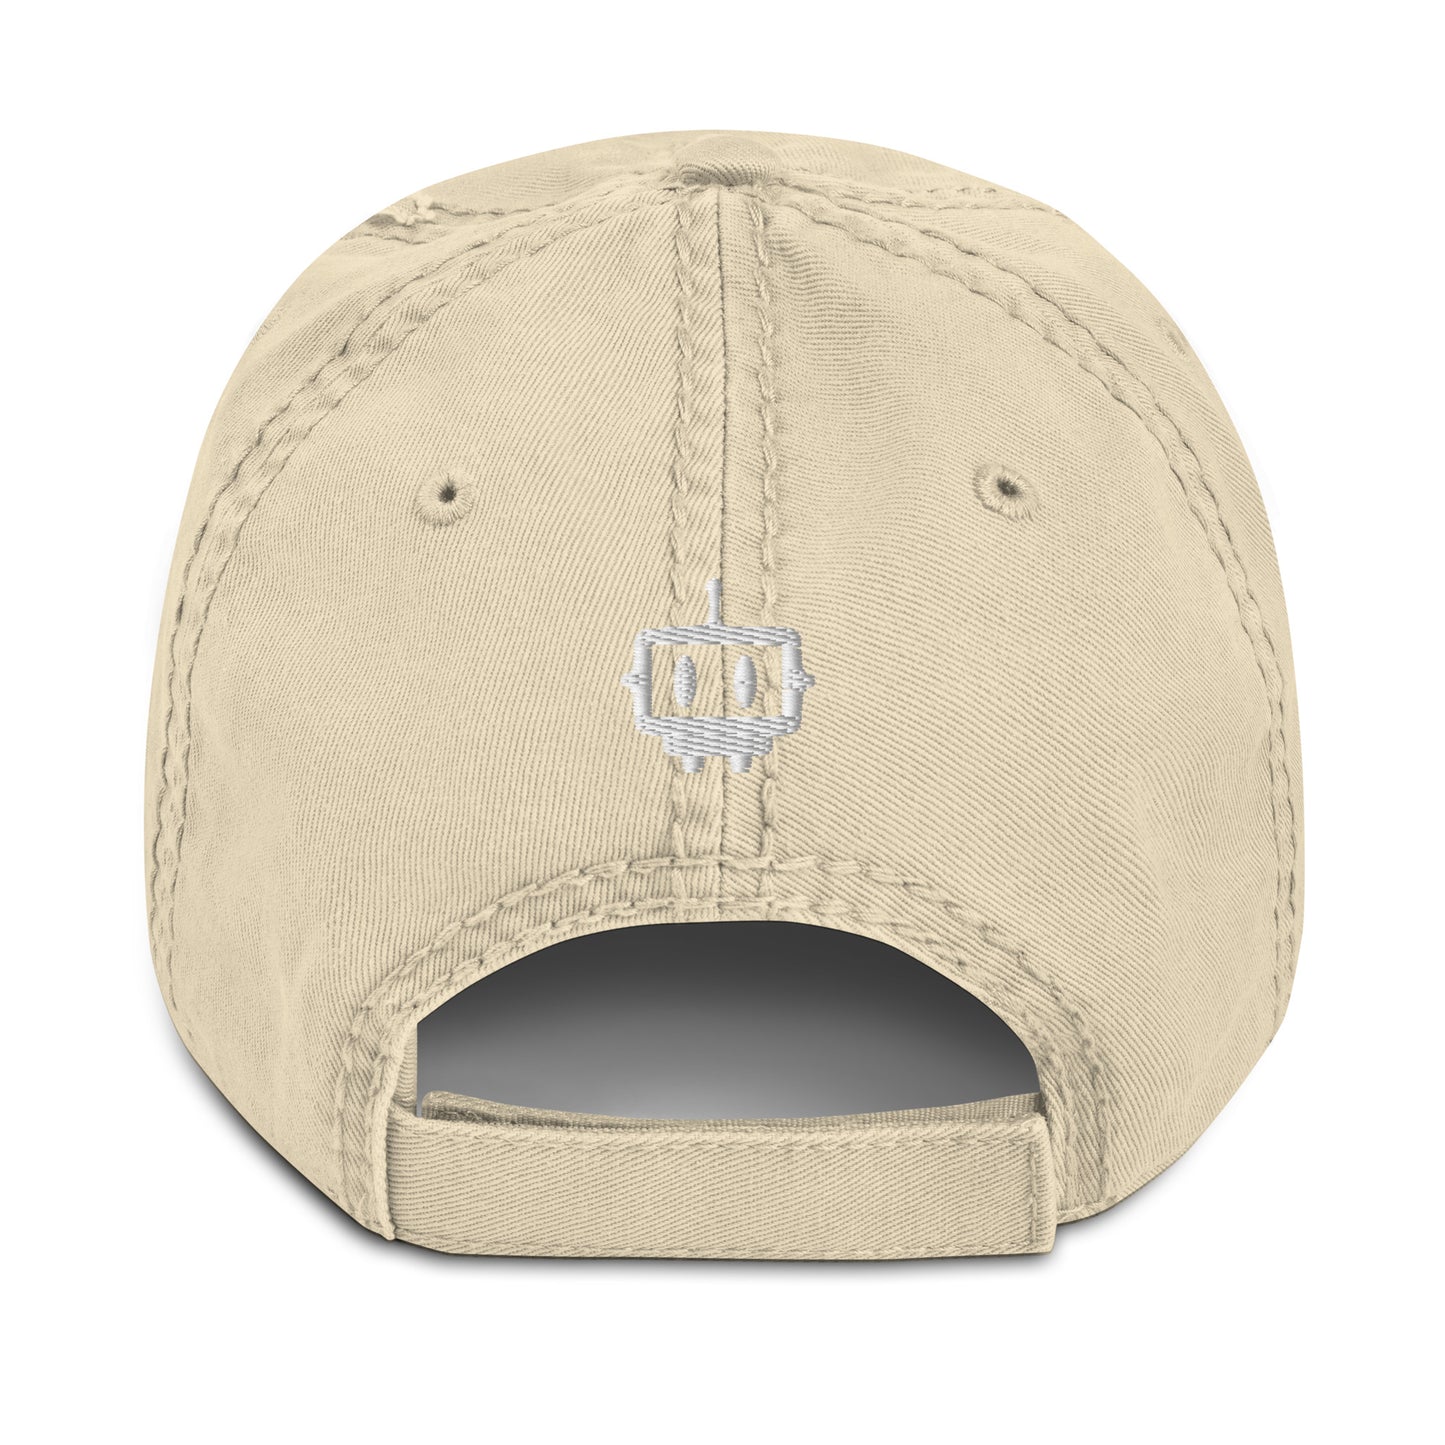 Nuclear Idea - Distressed Dad Hat